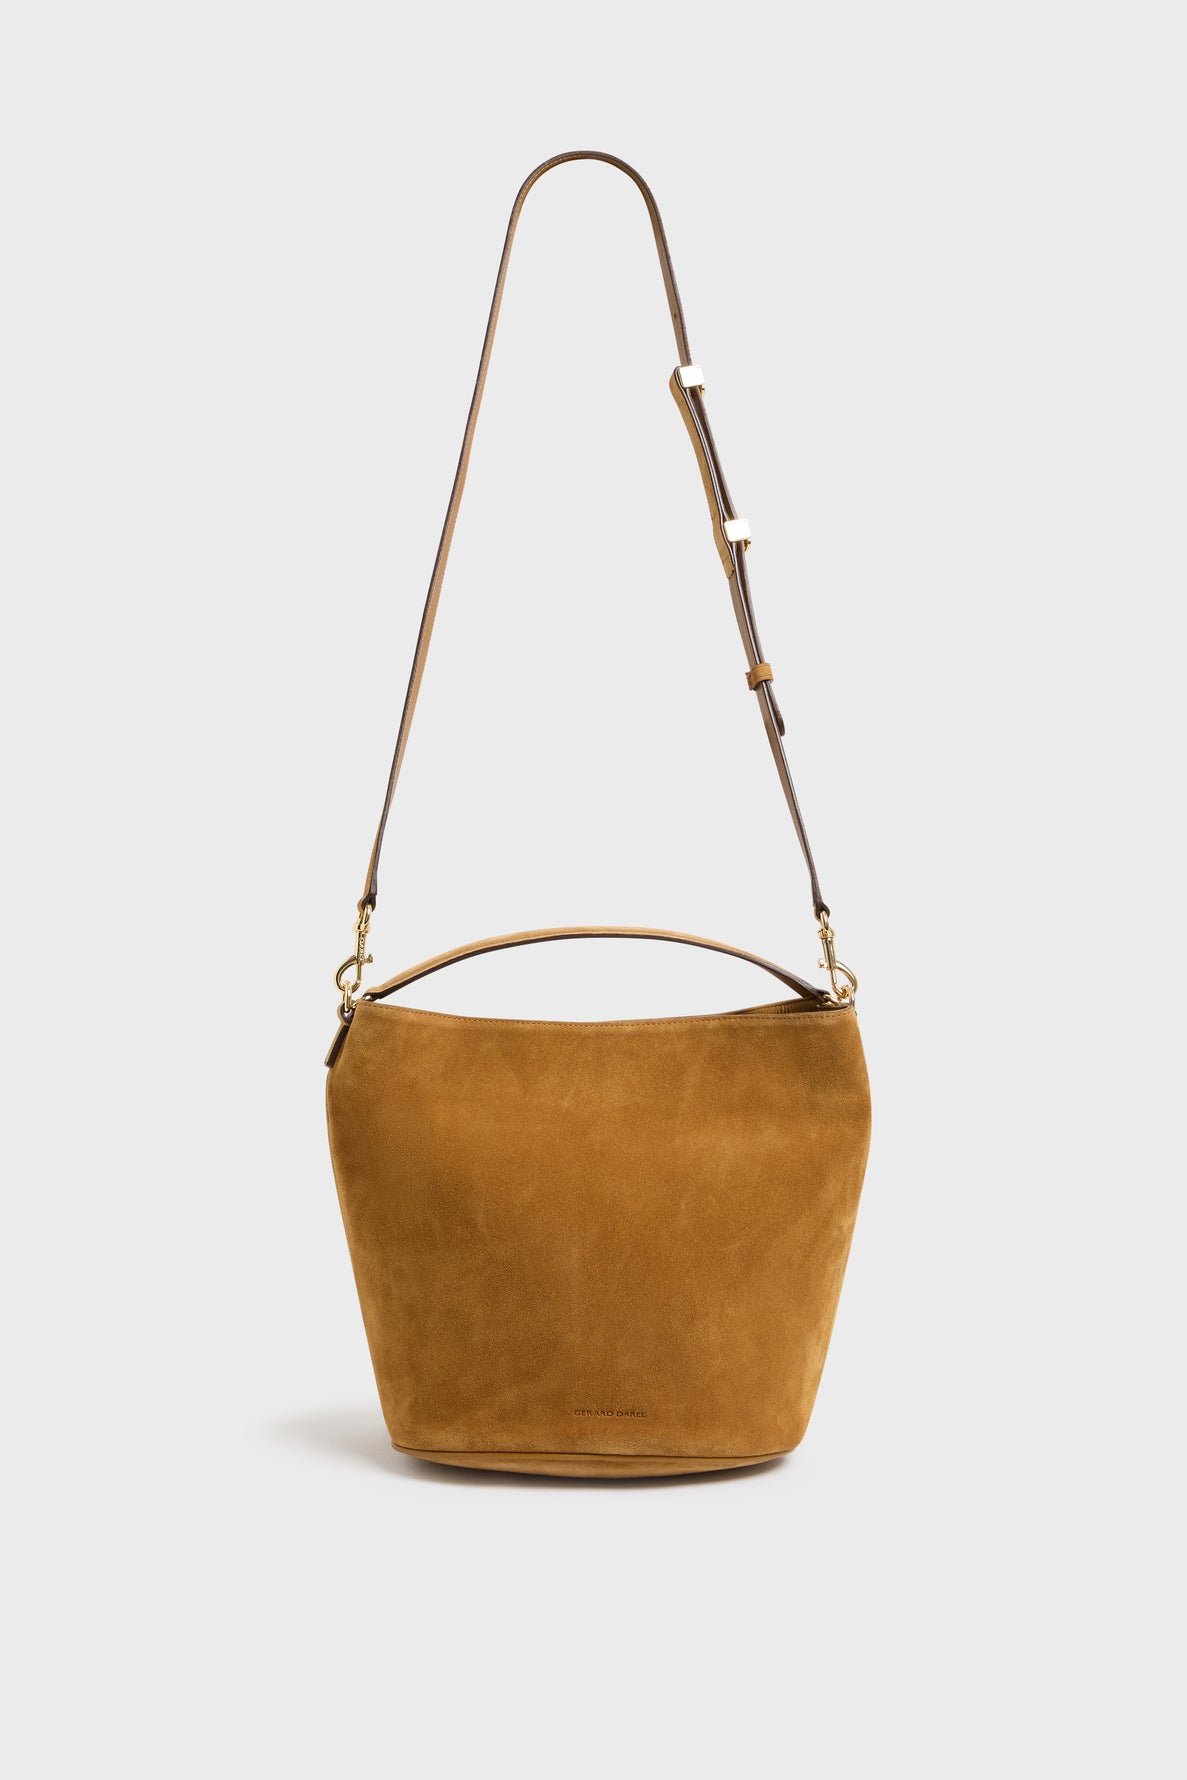 Hobo bag in suede leather - LE CHARLOTTE